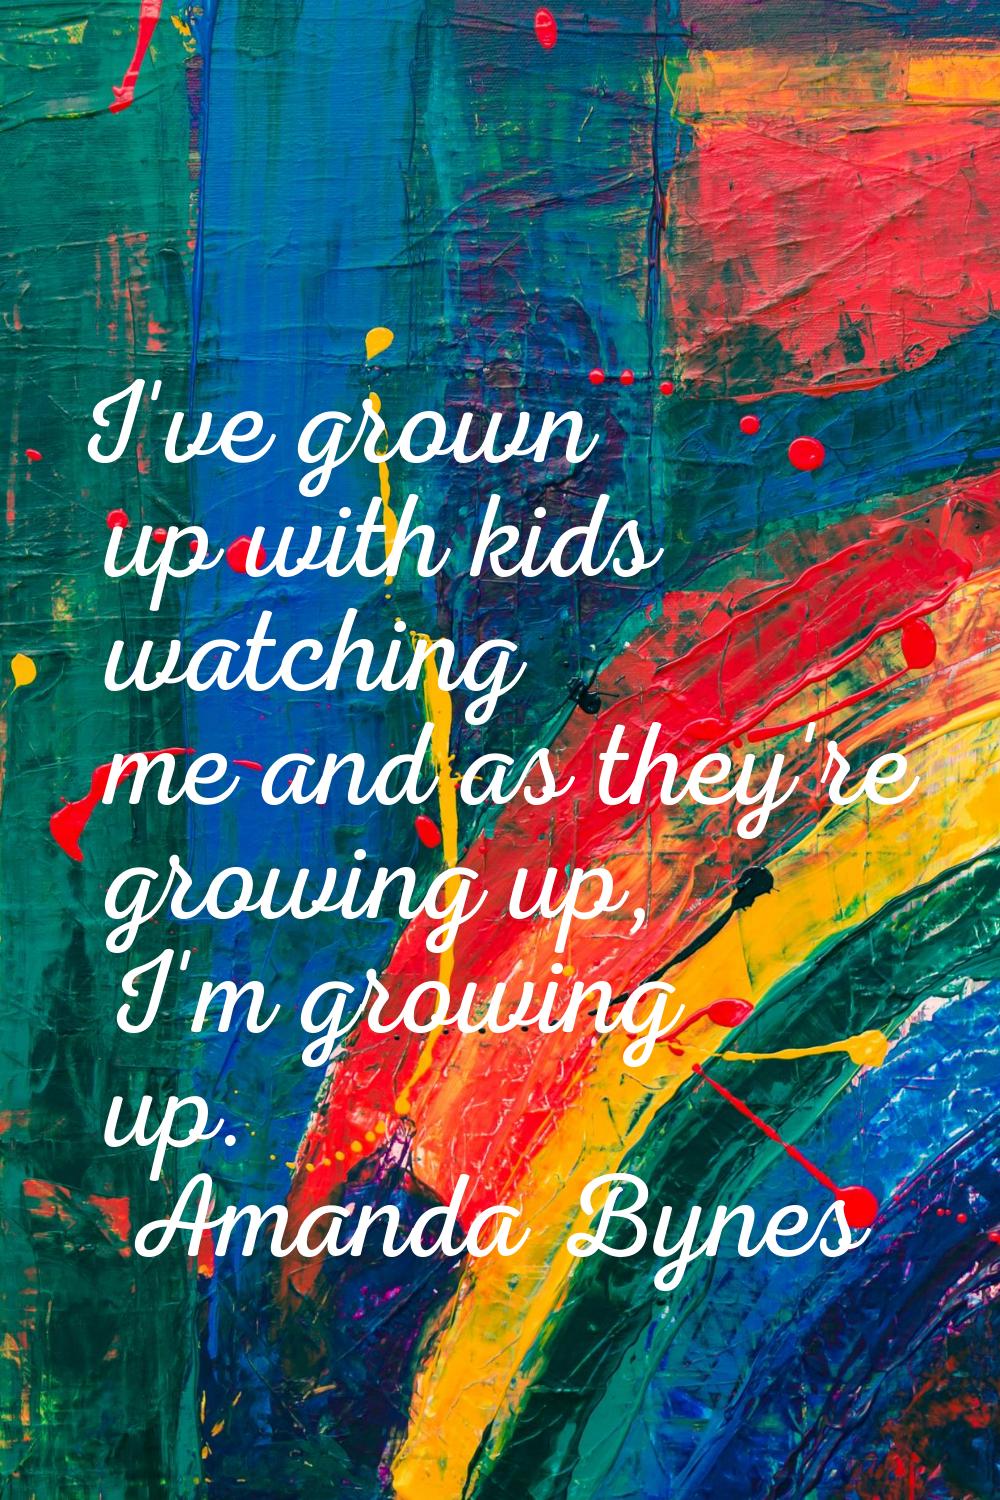 I've grown up with kids watching me and as they're growing up, I'm growing up.